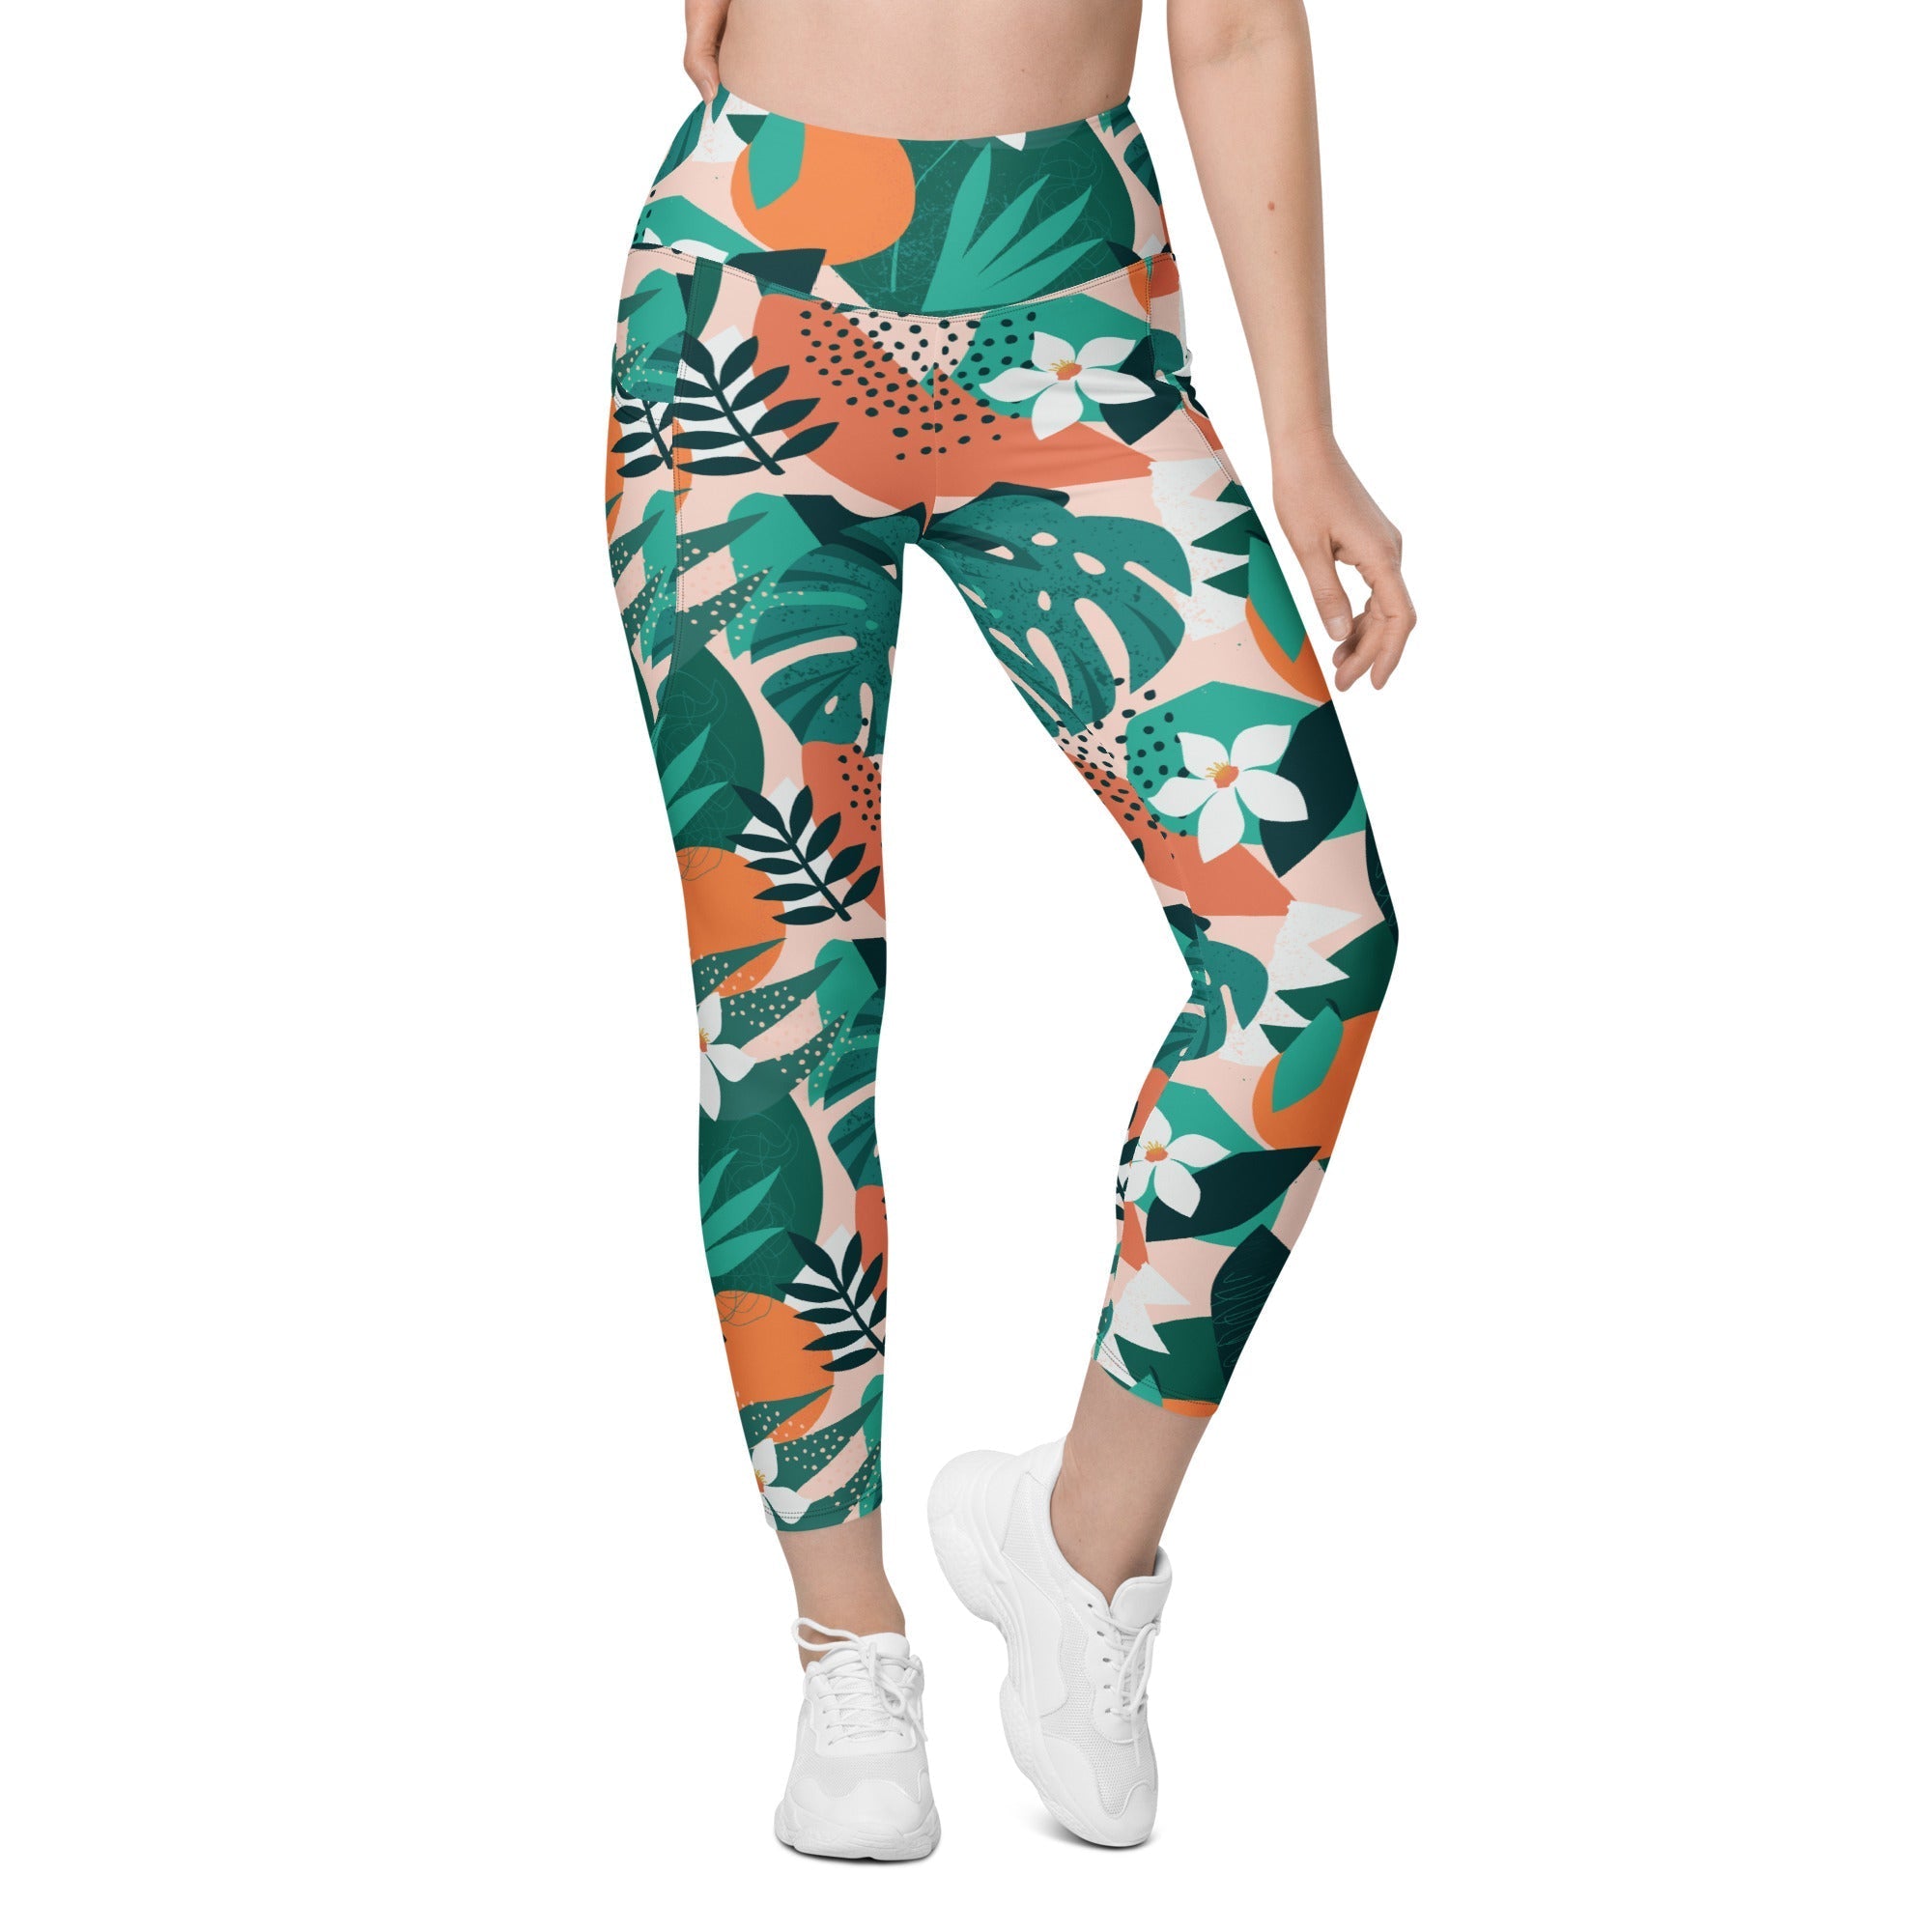 Flamingo Recycled Leggings With Pockets All-over Tropical Pink Flamingo  Pattern Print Leggings Sizes 2XS 6XL 